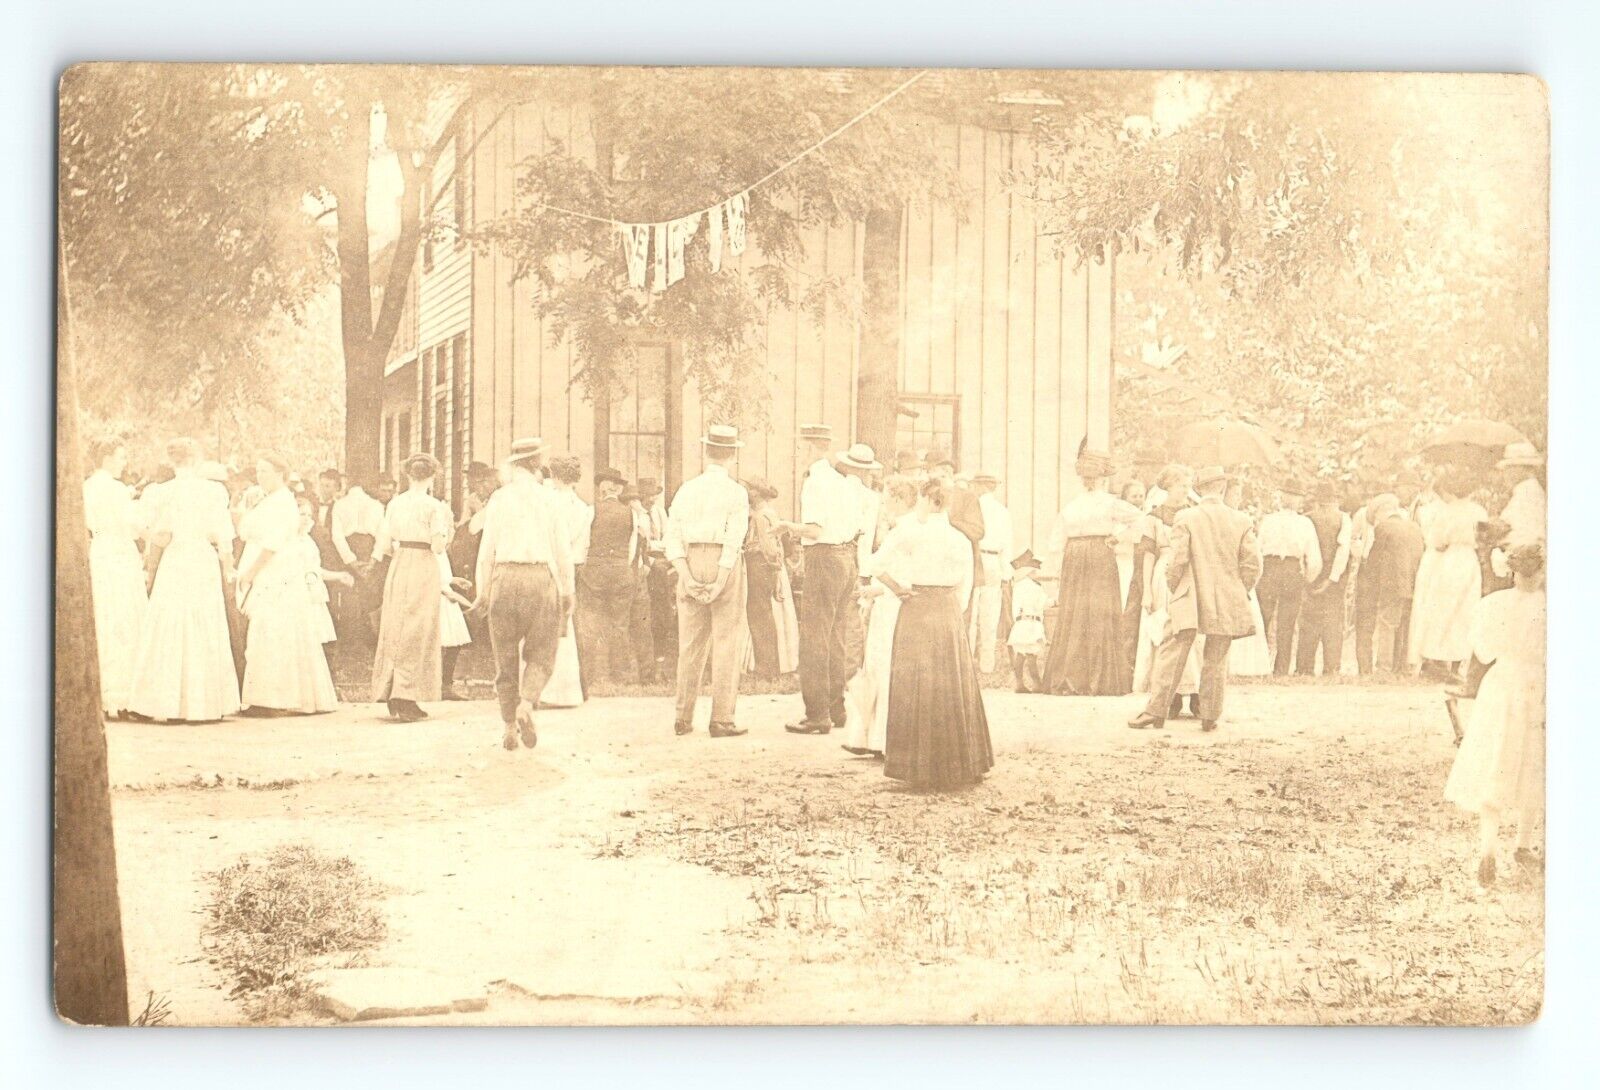 c.1911 RPPC Gathering of People Probably Homecoming Event Edenton OH Clermont Co